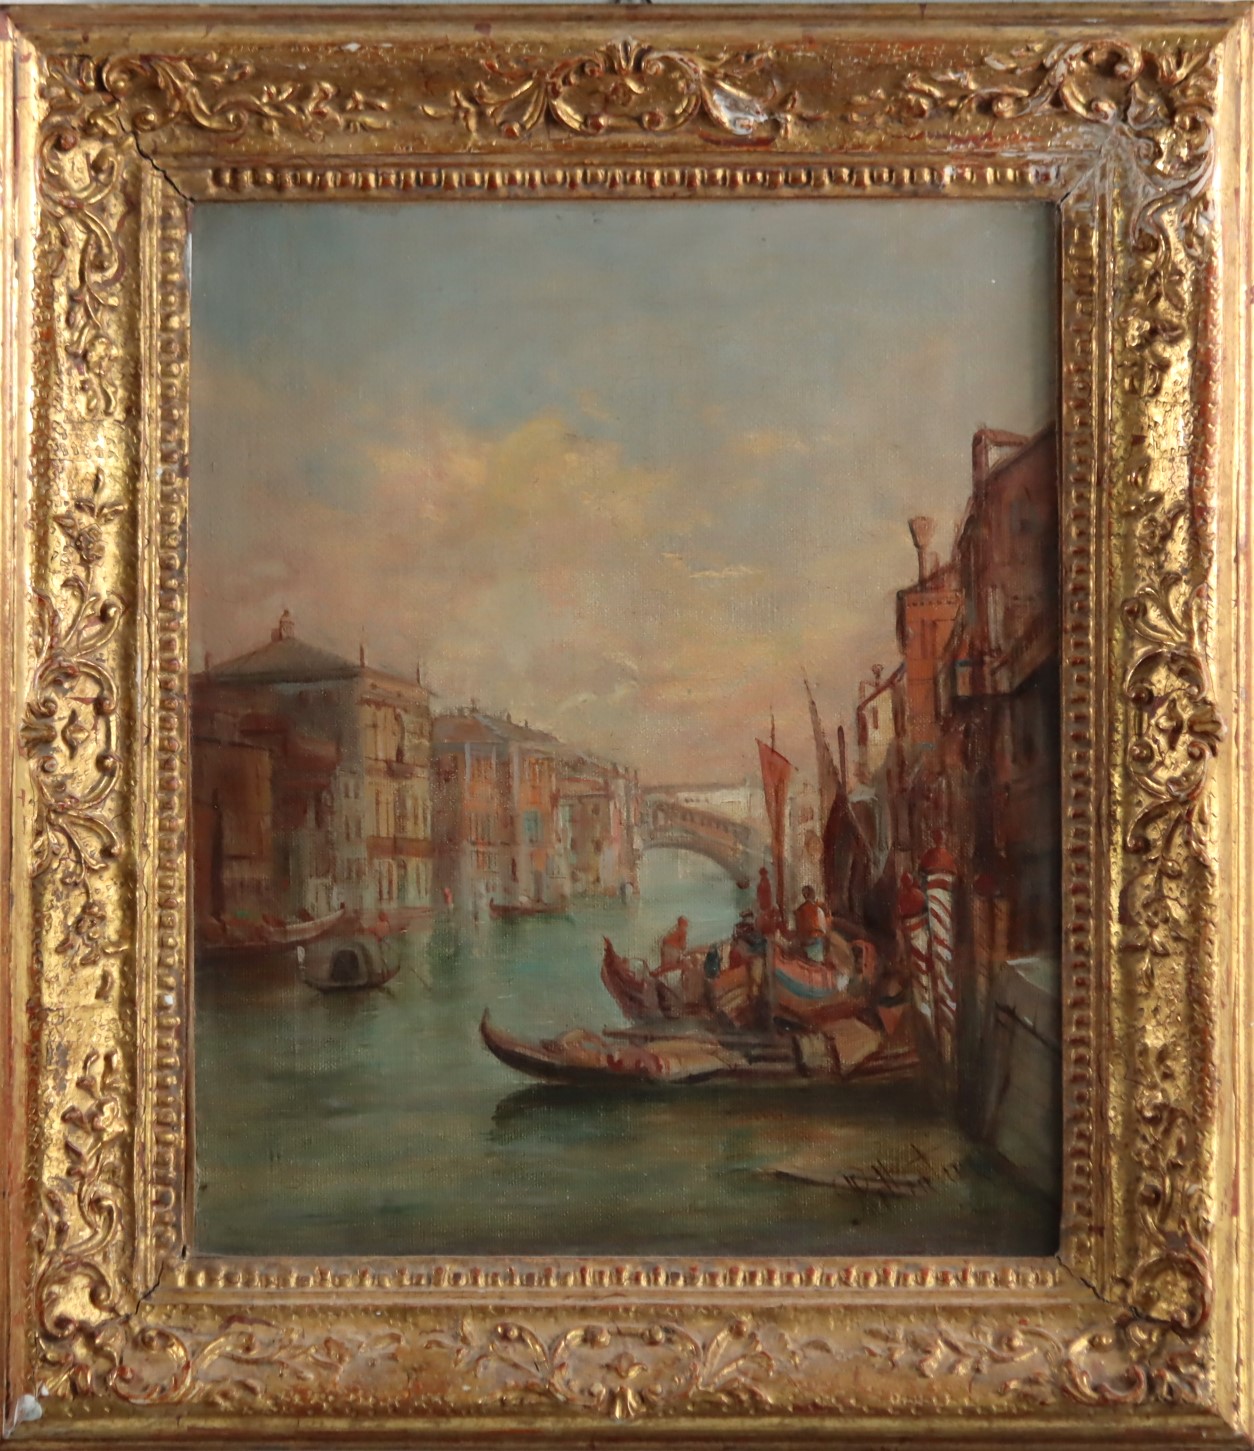 Alfred Pollentine, Venice Canal scene, Oil on Canvas, 19th Century - Image 2 of 3